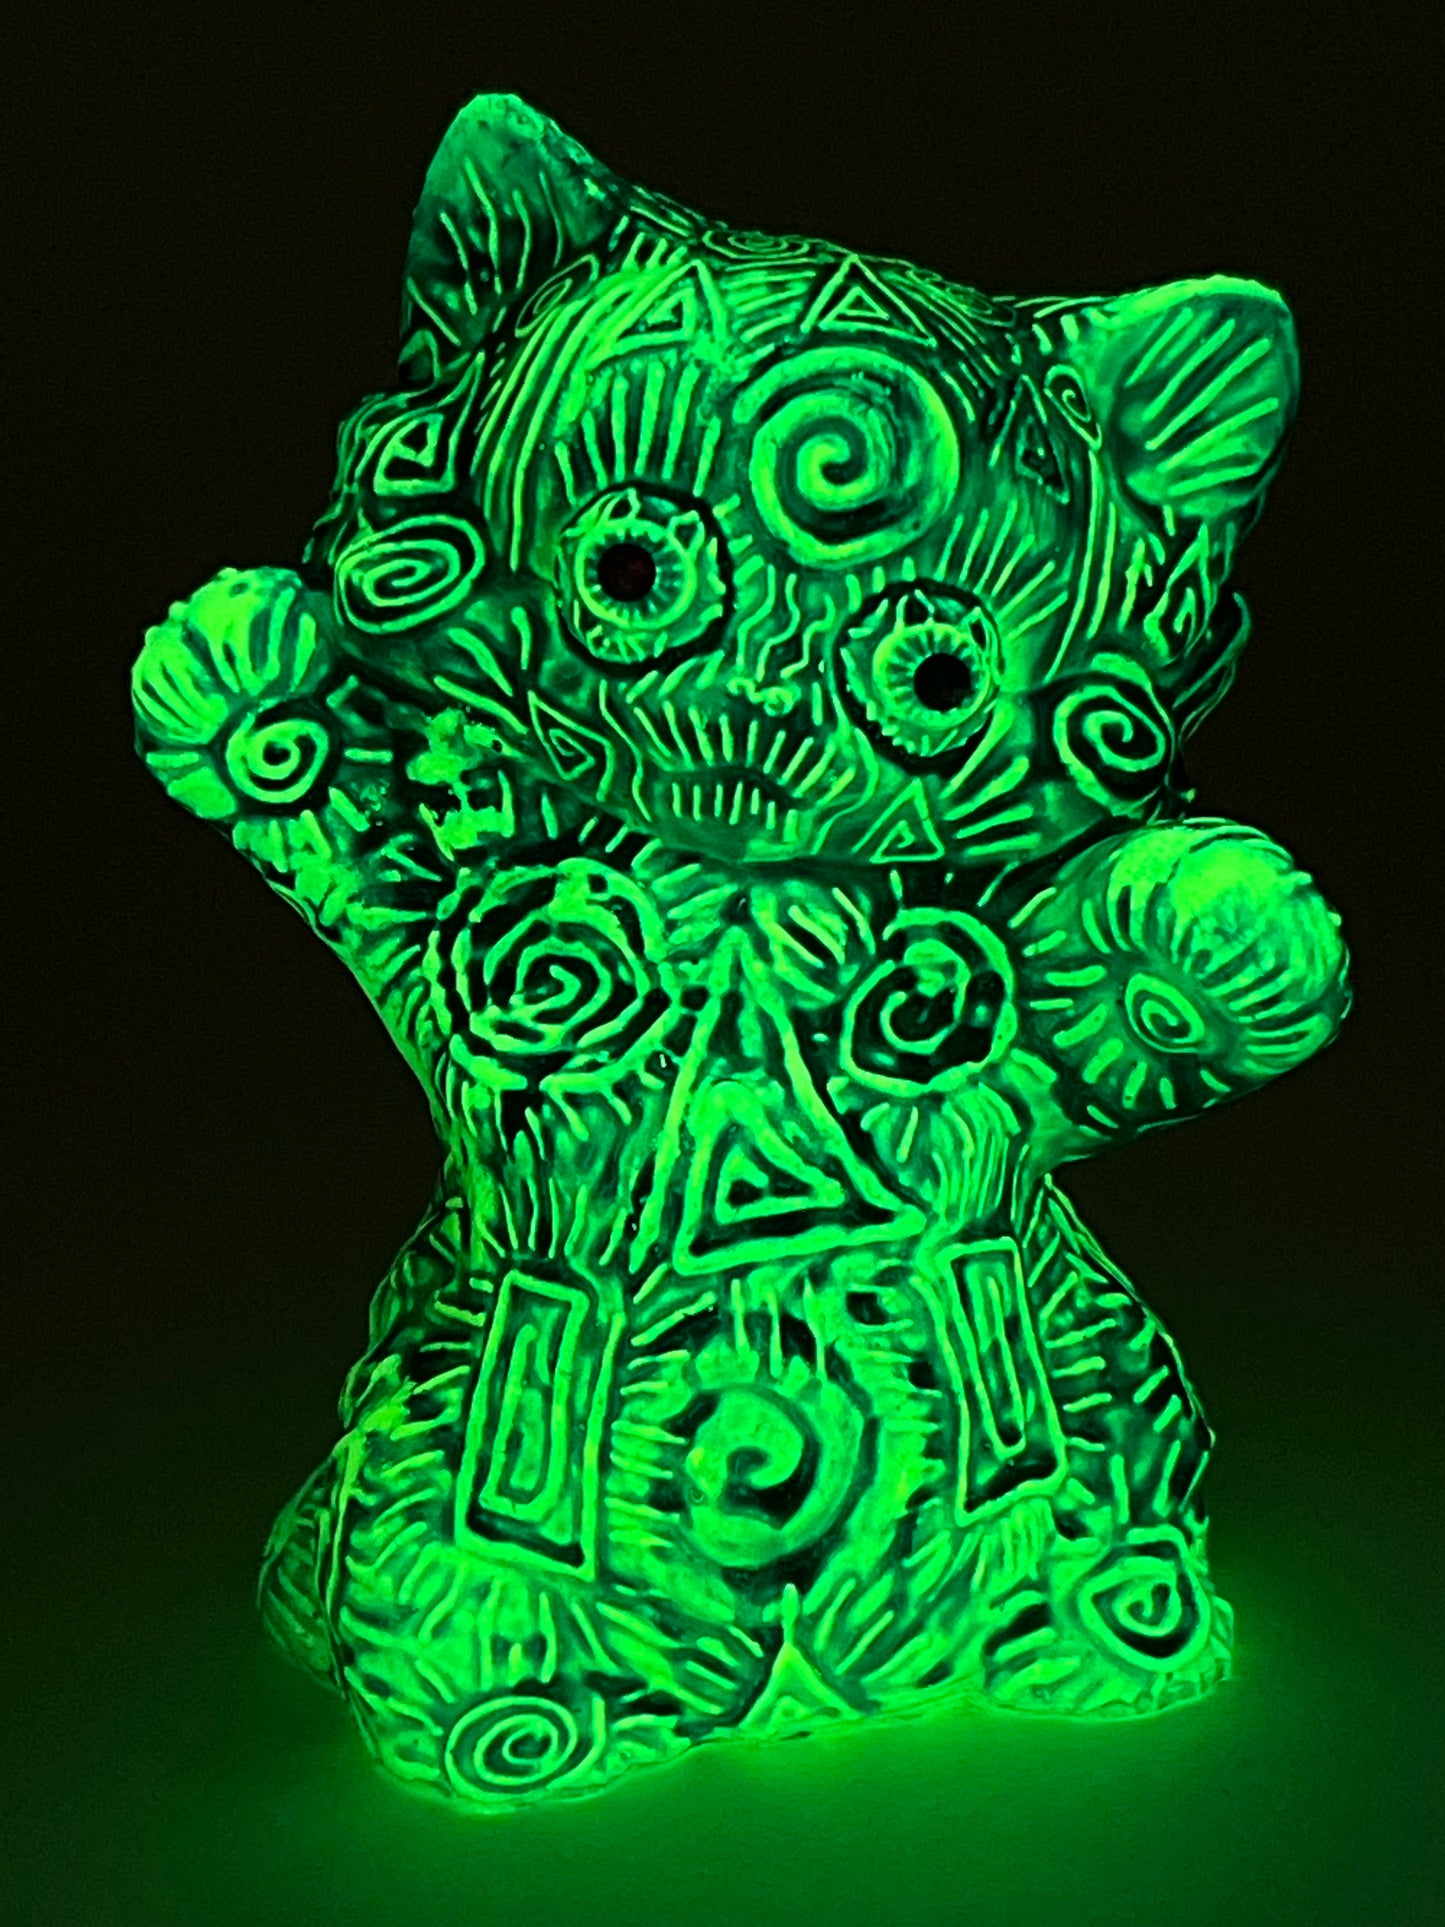 After Cat: Green Glow Chaos World